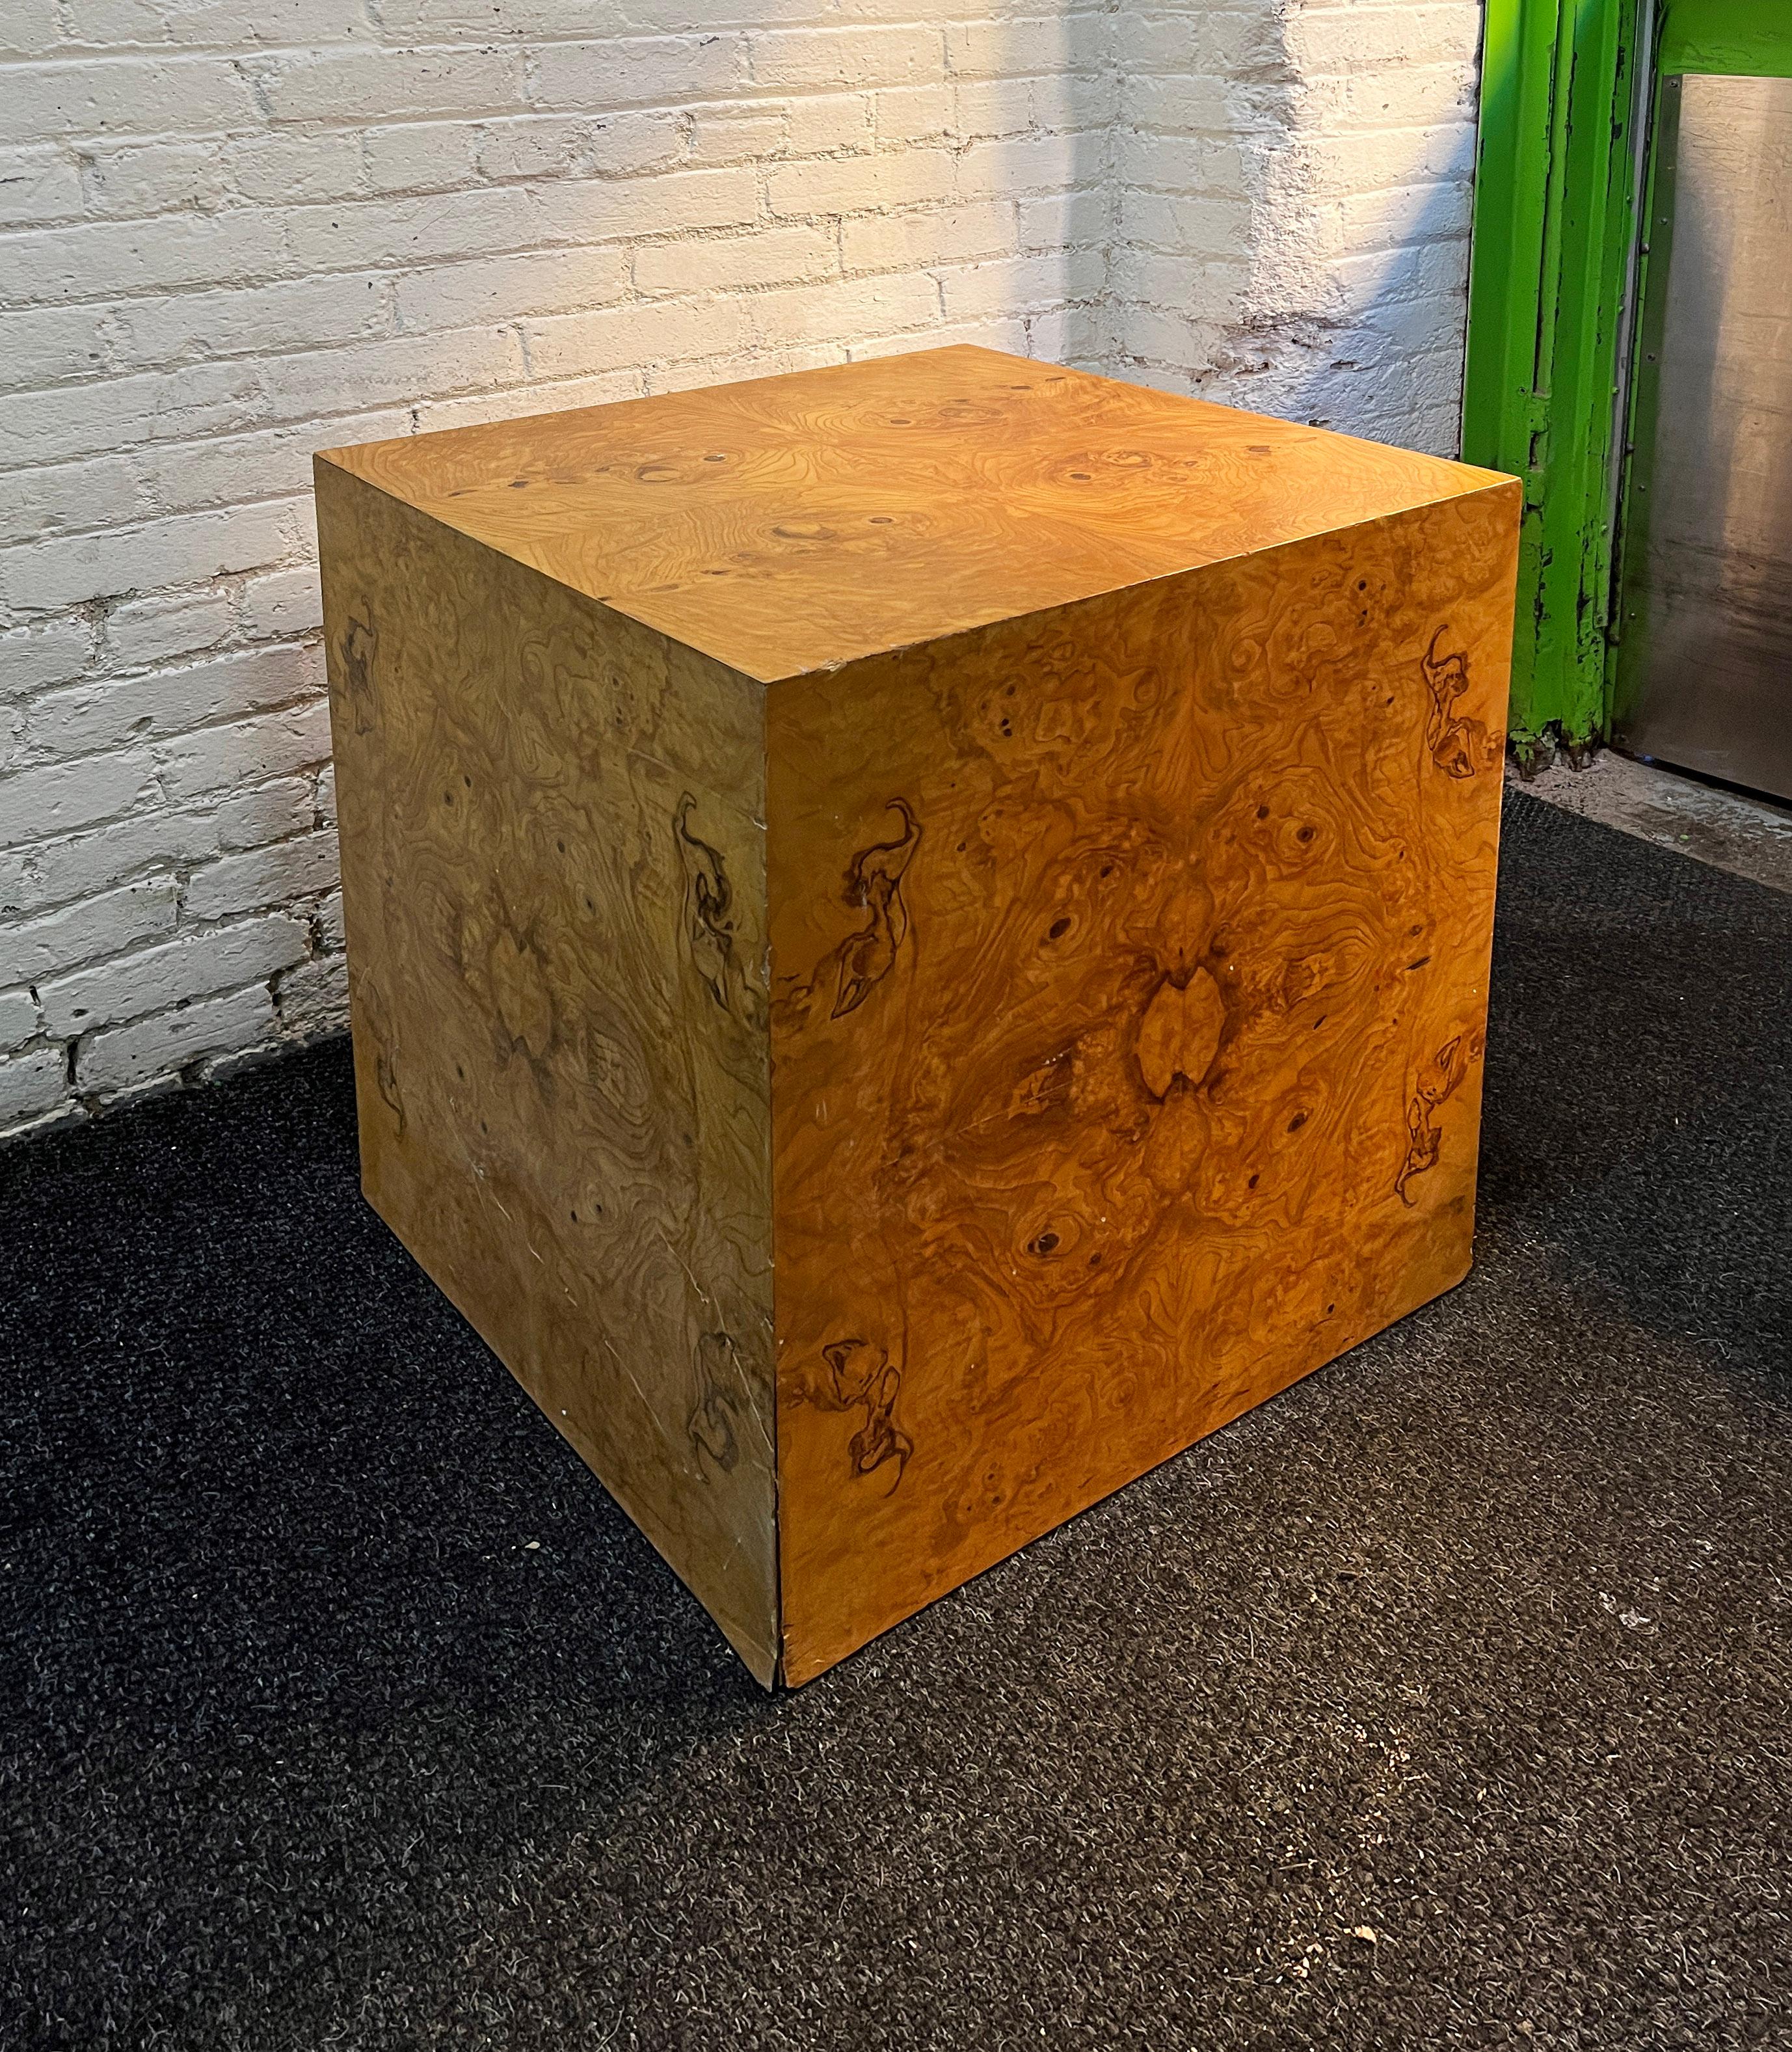 American Midcentury Burlwood Cube Side Table / Pedestal Attributed to Milo Baughman, 1970 For Sale